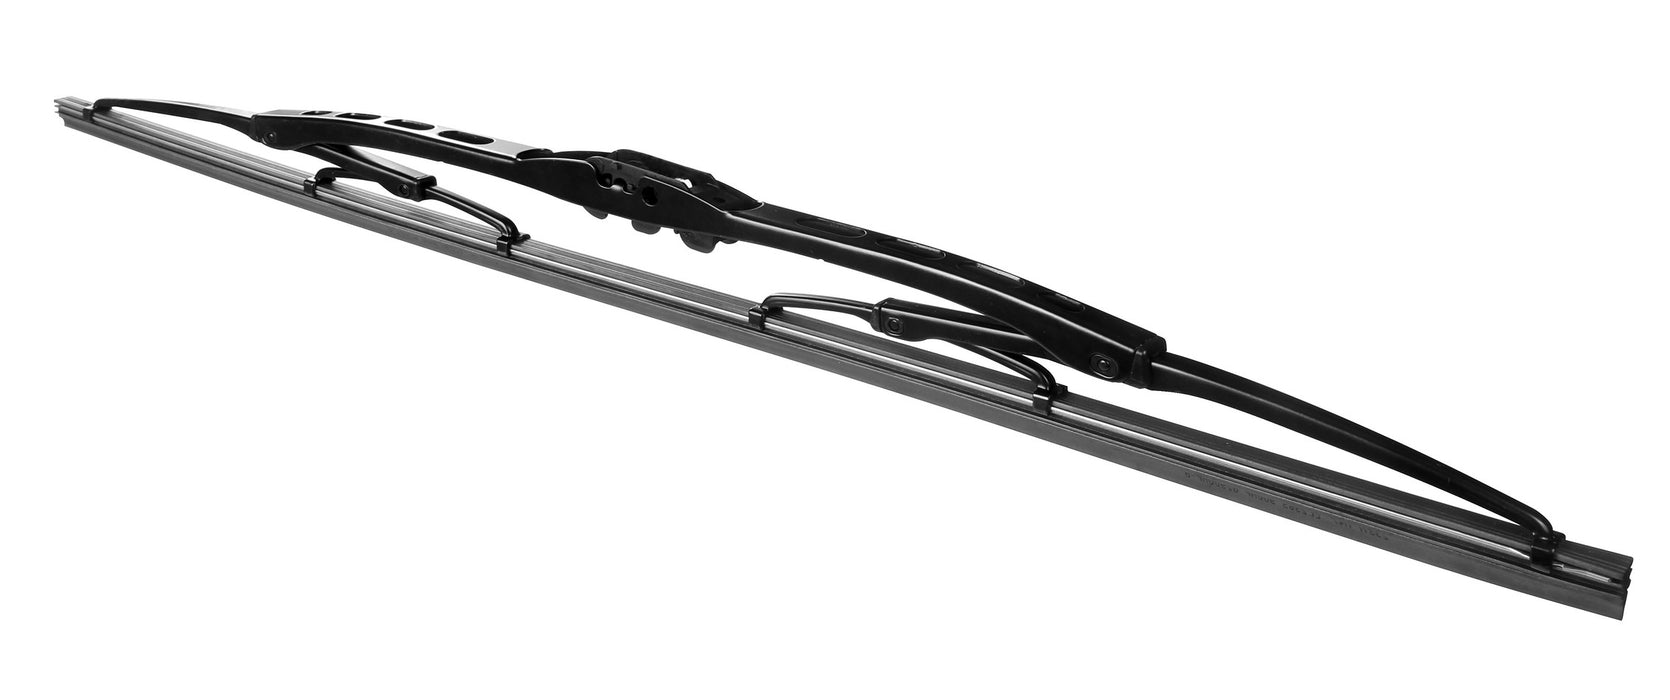 Ford Mondeo Mk2 Estate 1996-2000 Xtremeauto® Rear Window Windscreen Replacement Wiper Blades